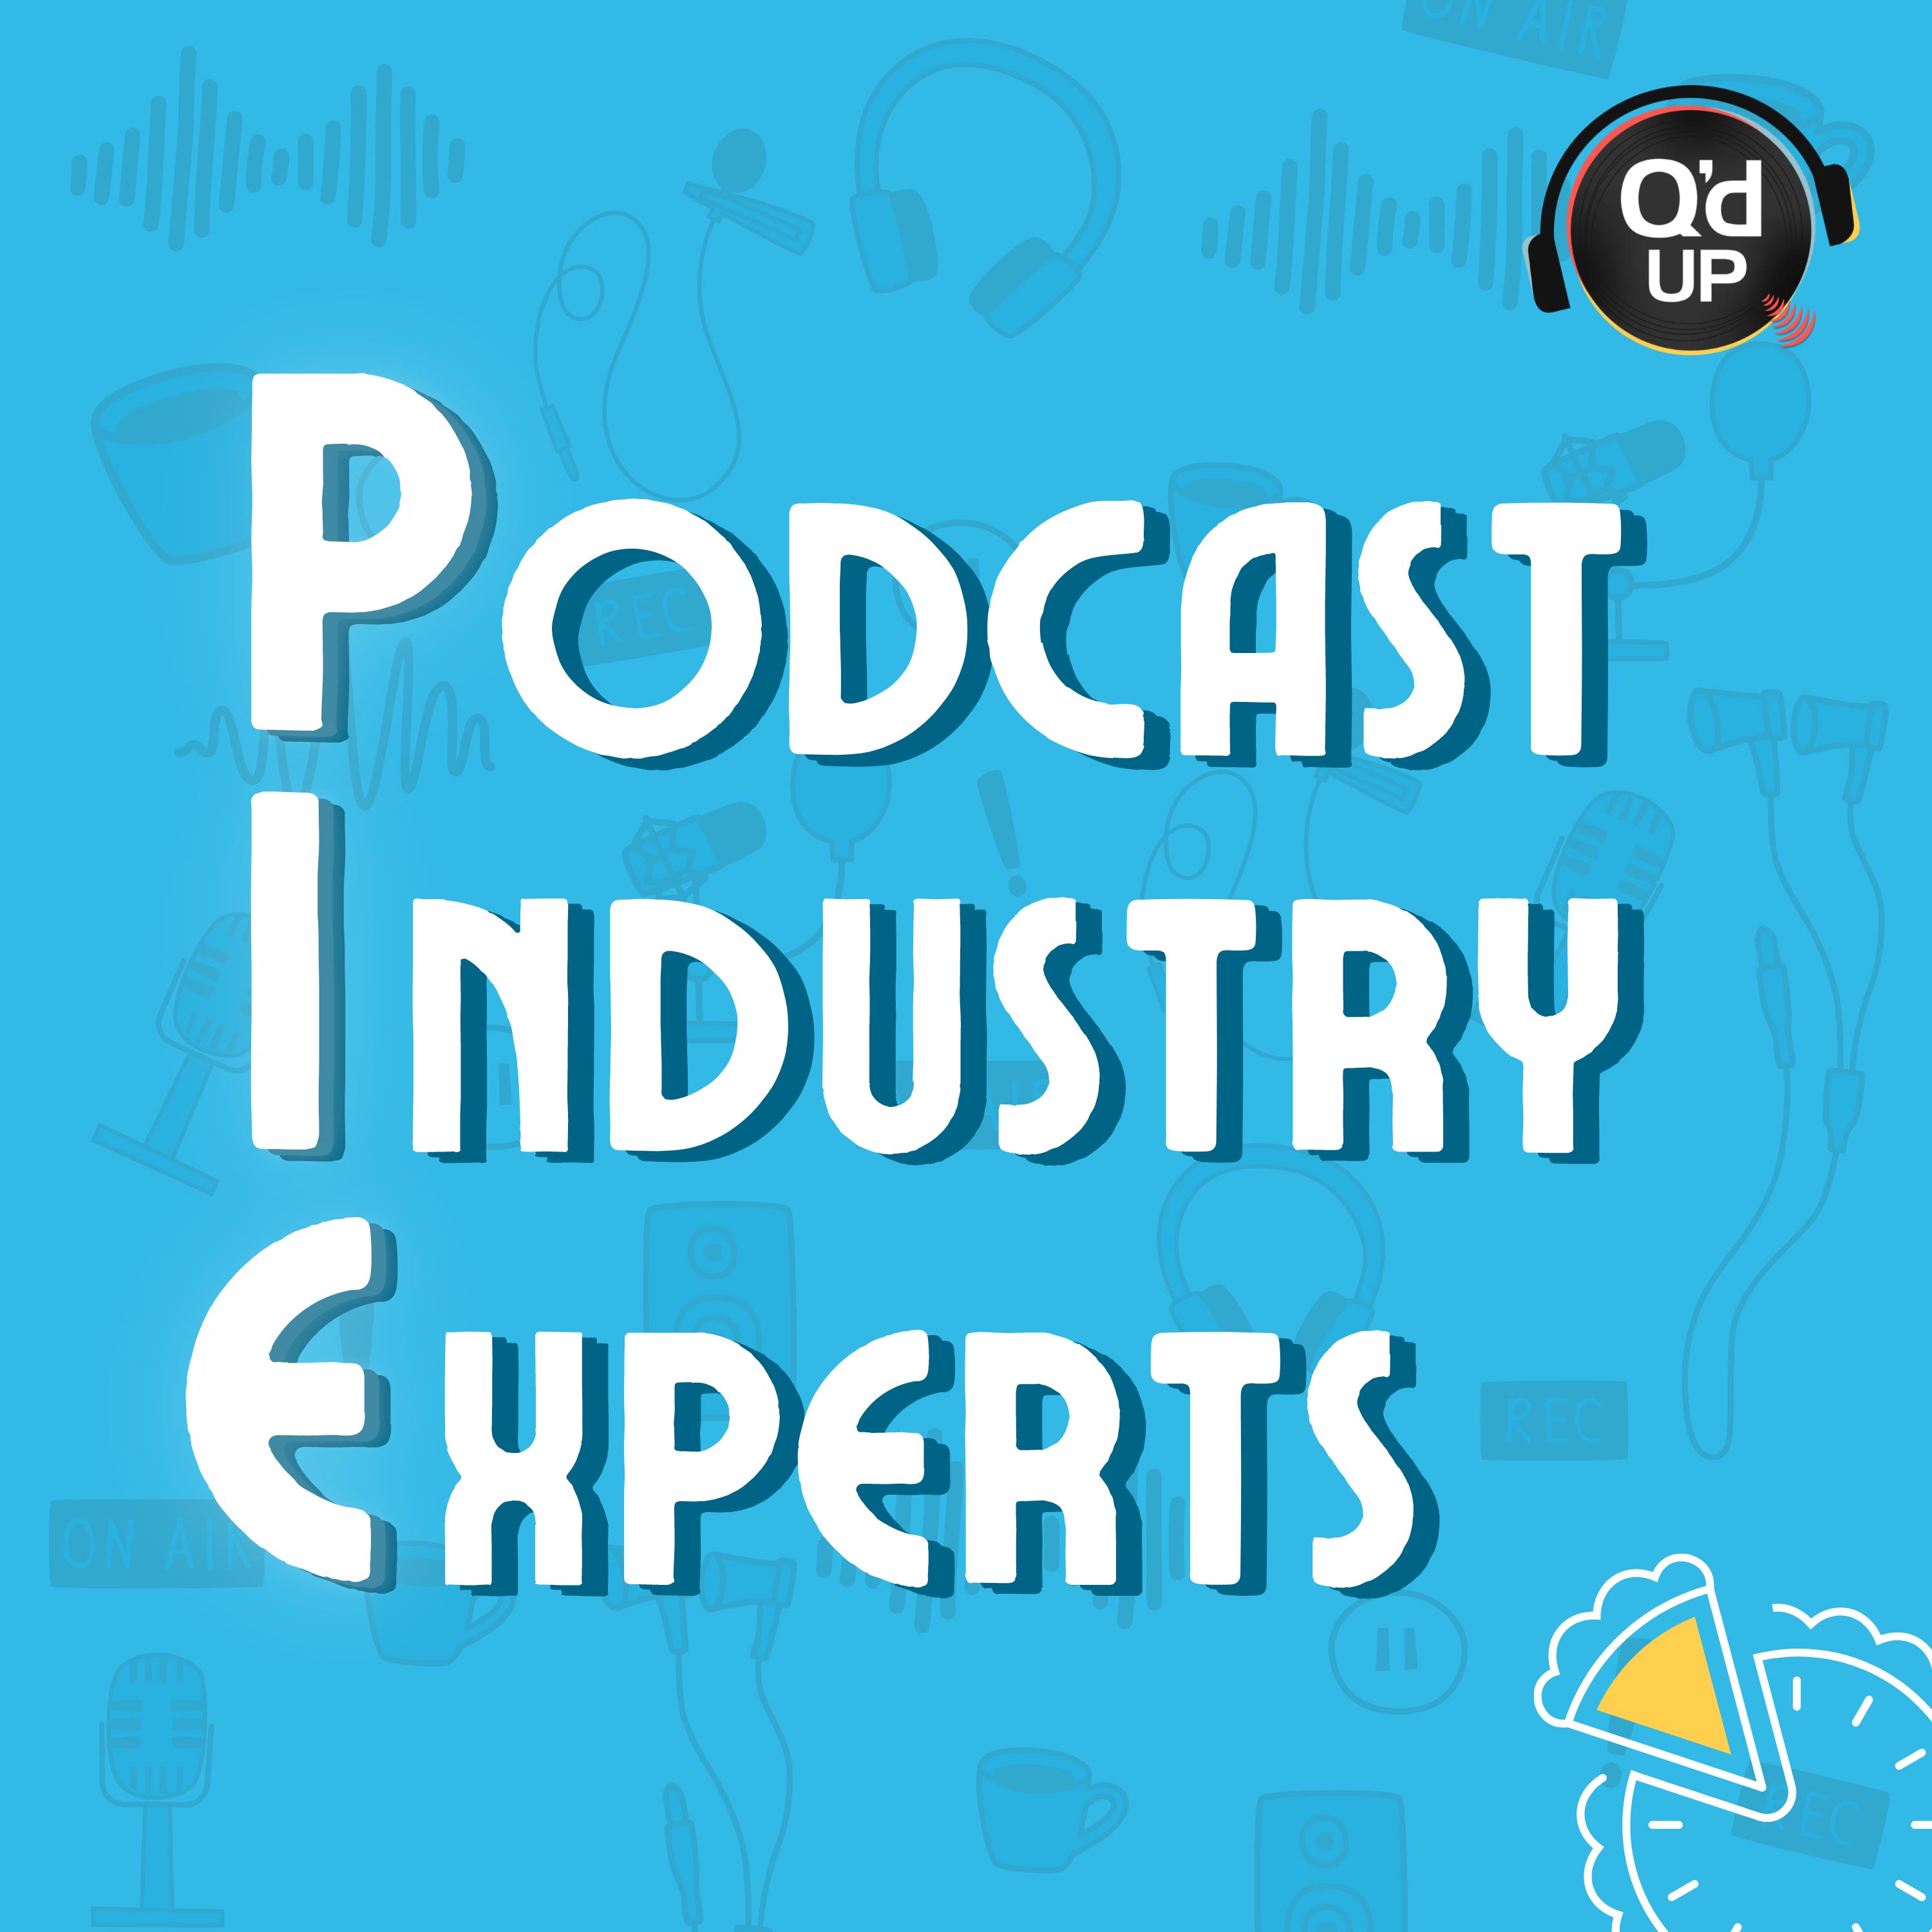 Artwork for Podcast Industry Experts